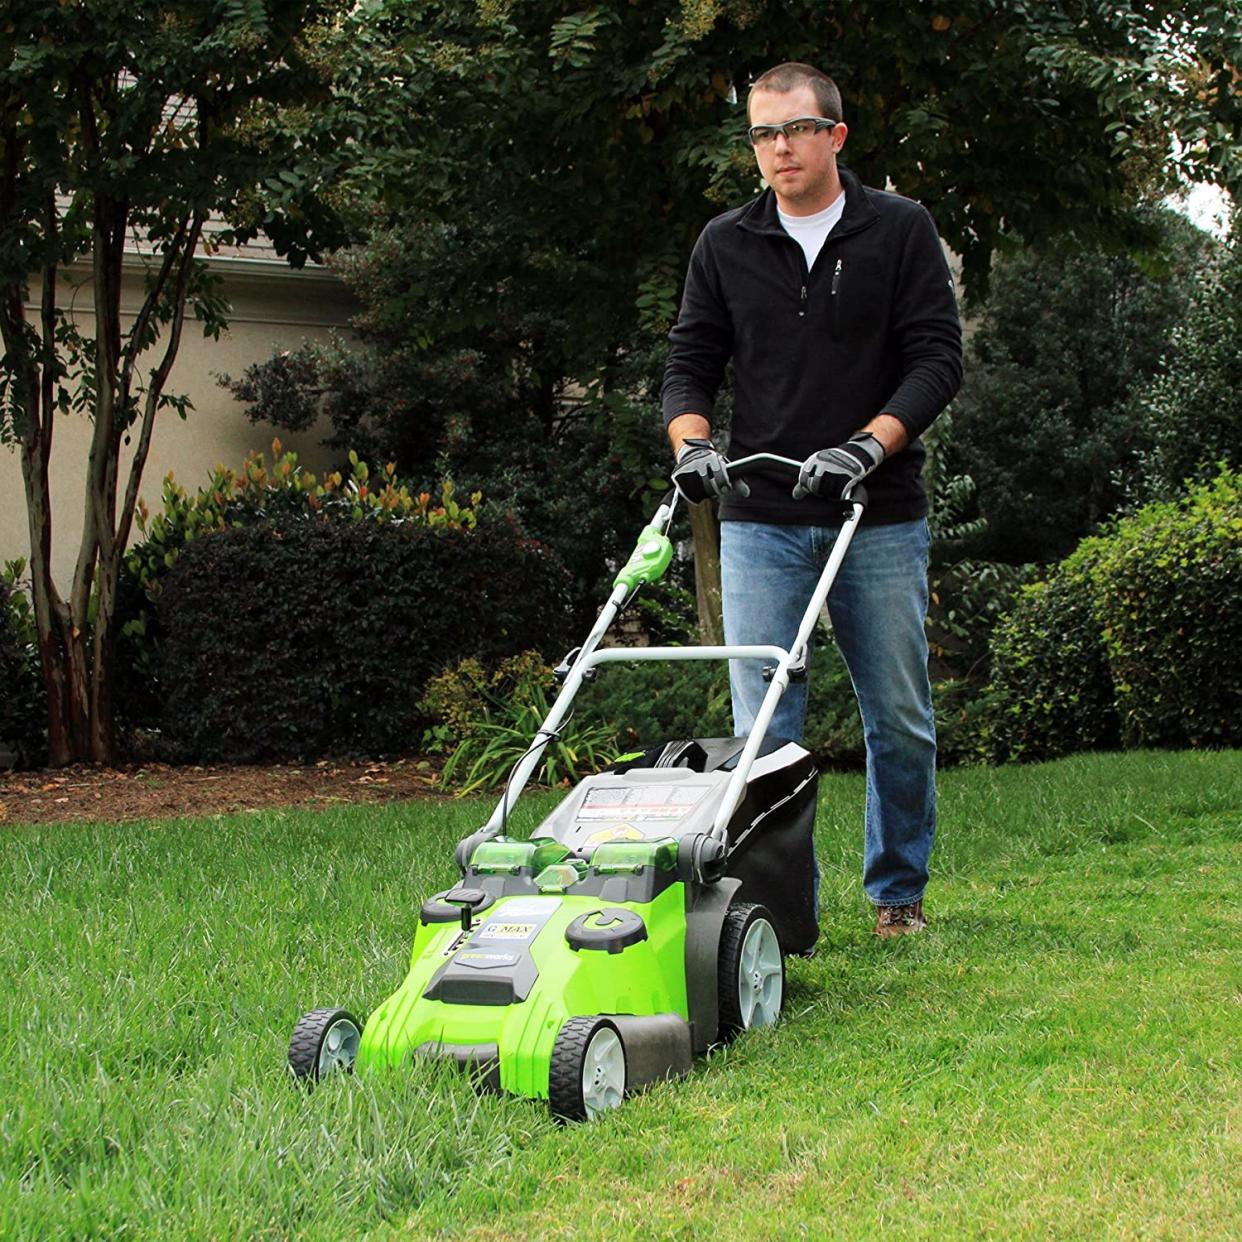 Man wearing safety glasses and gloves while mowing lawn with push mower